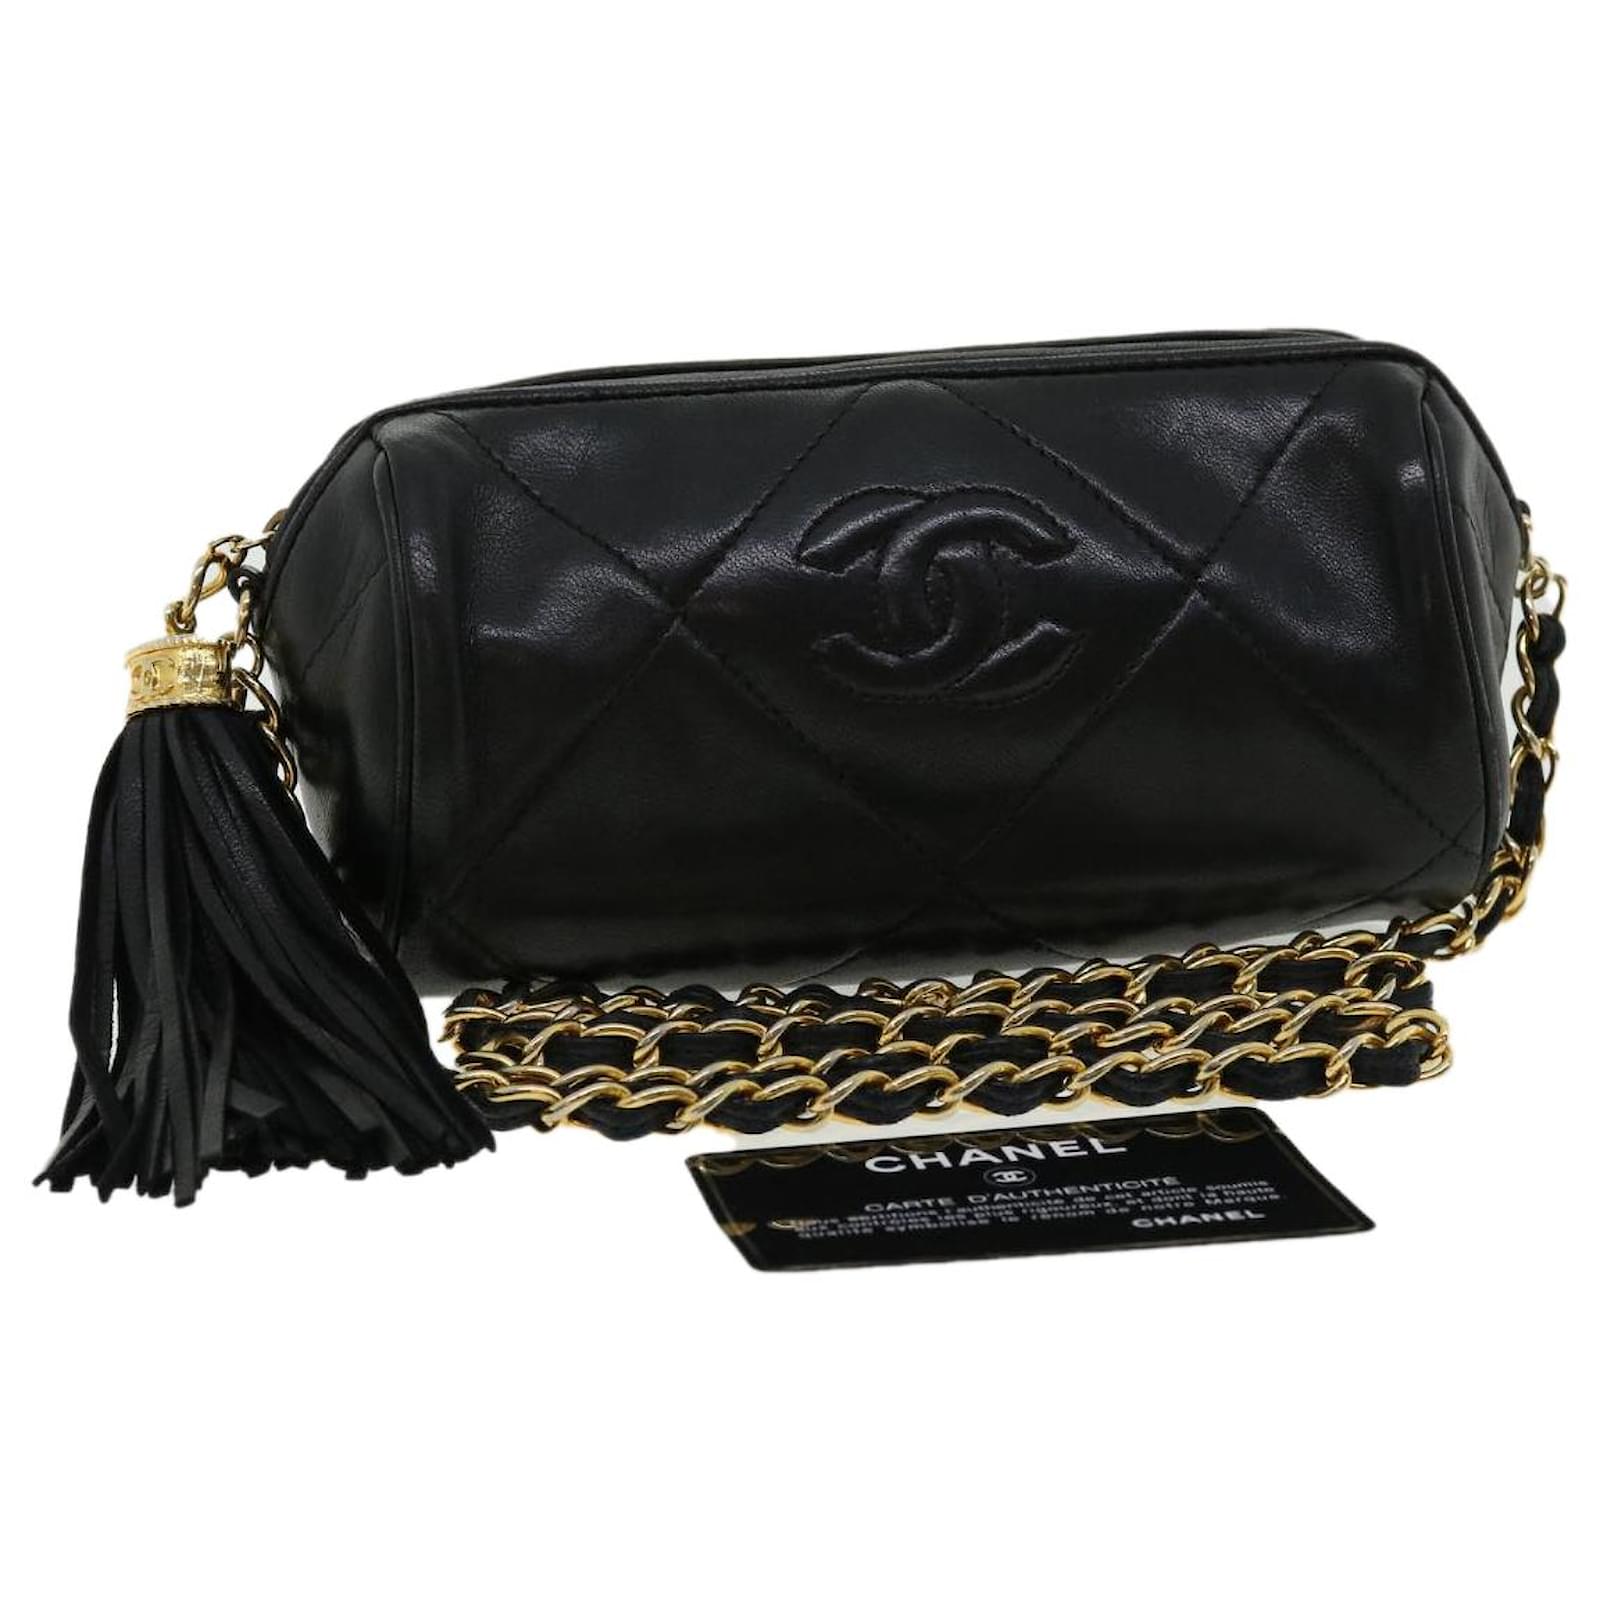 Chanel Vintage Chanel Black Quilted Leather Waist Pouch Bag Fringe